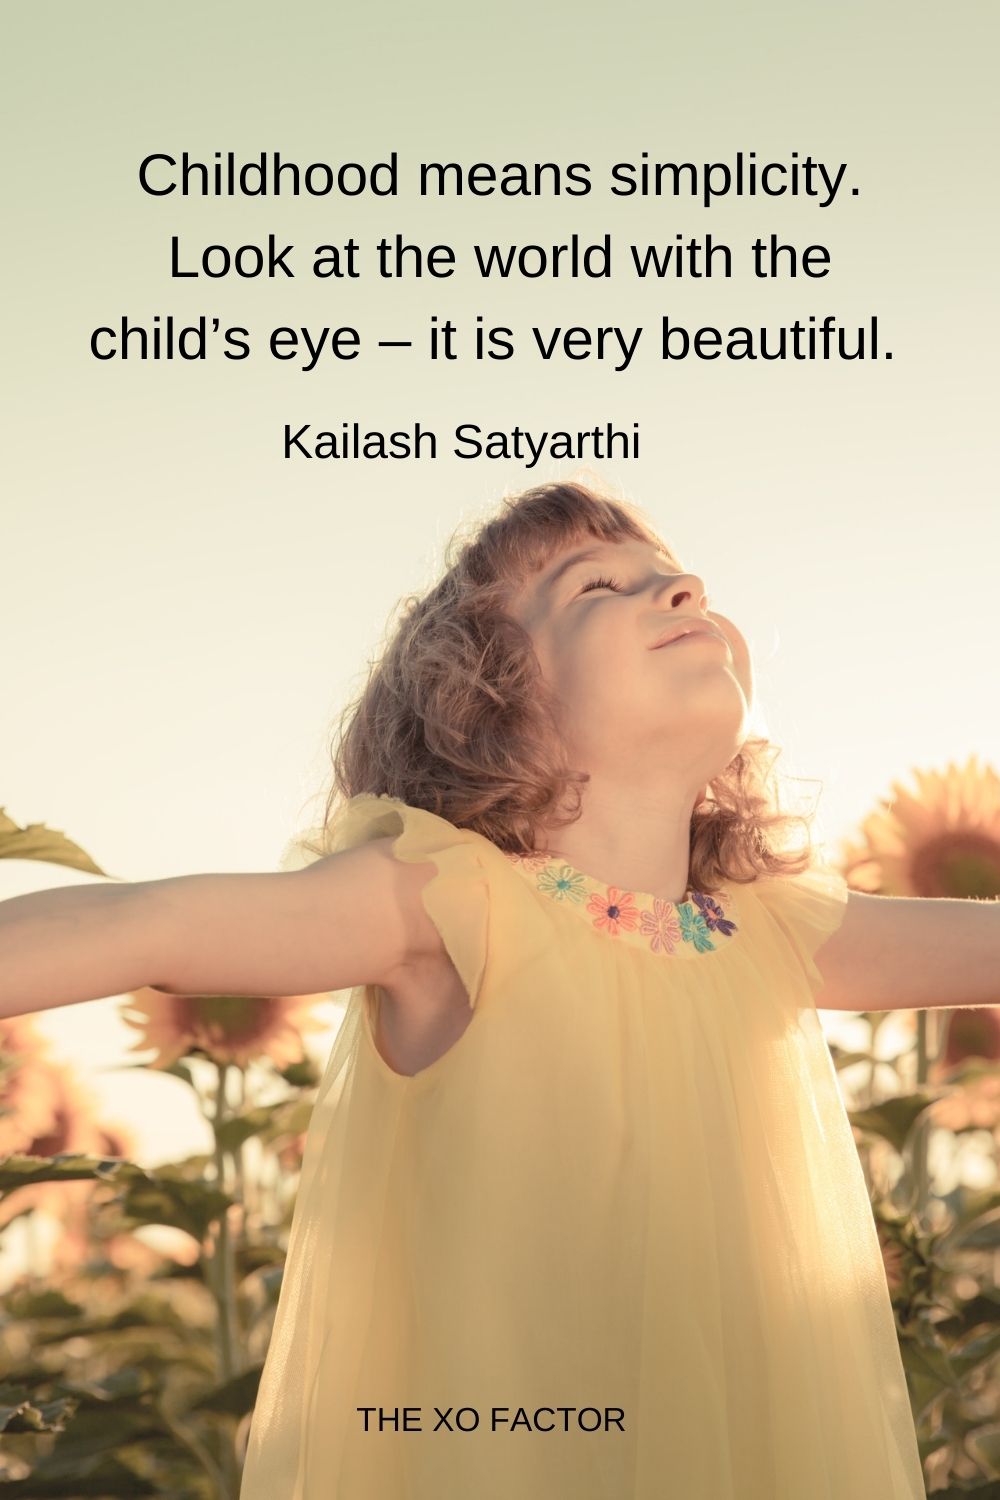 Childhood means simplicity. Look at the world with the child’s eye – it is very beautiful.  Kailash Satyarthi